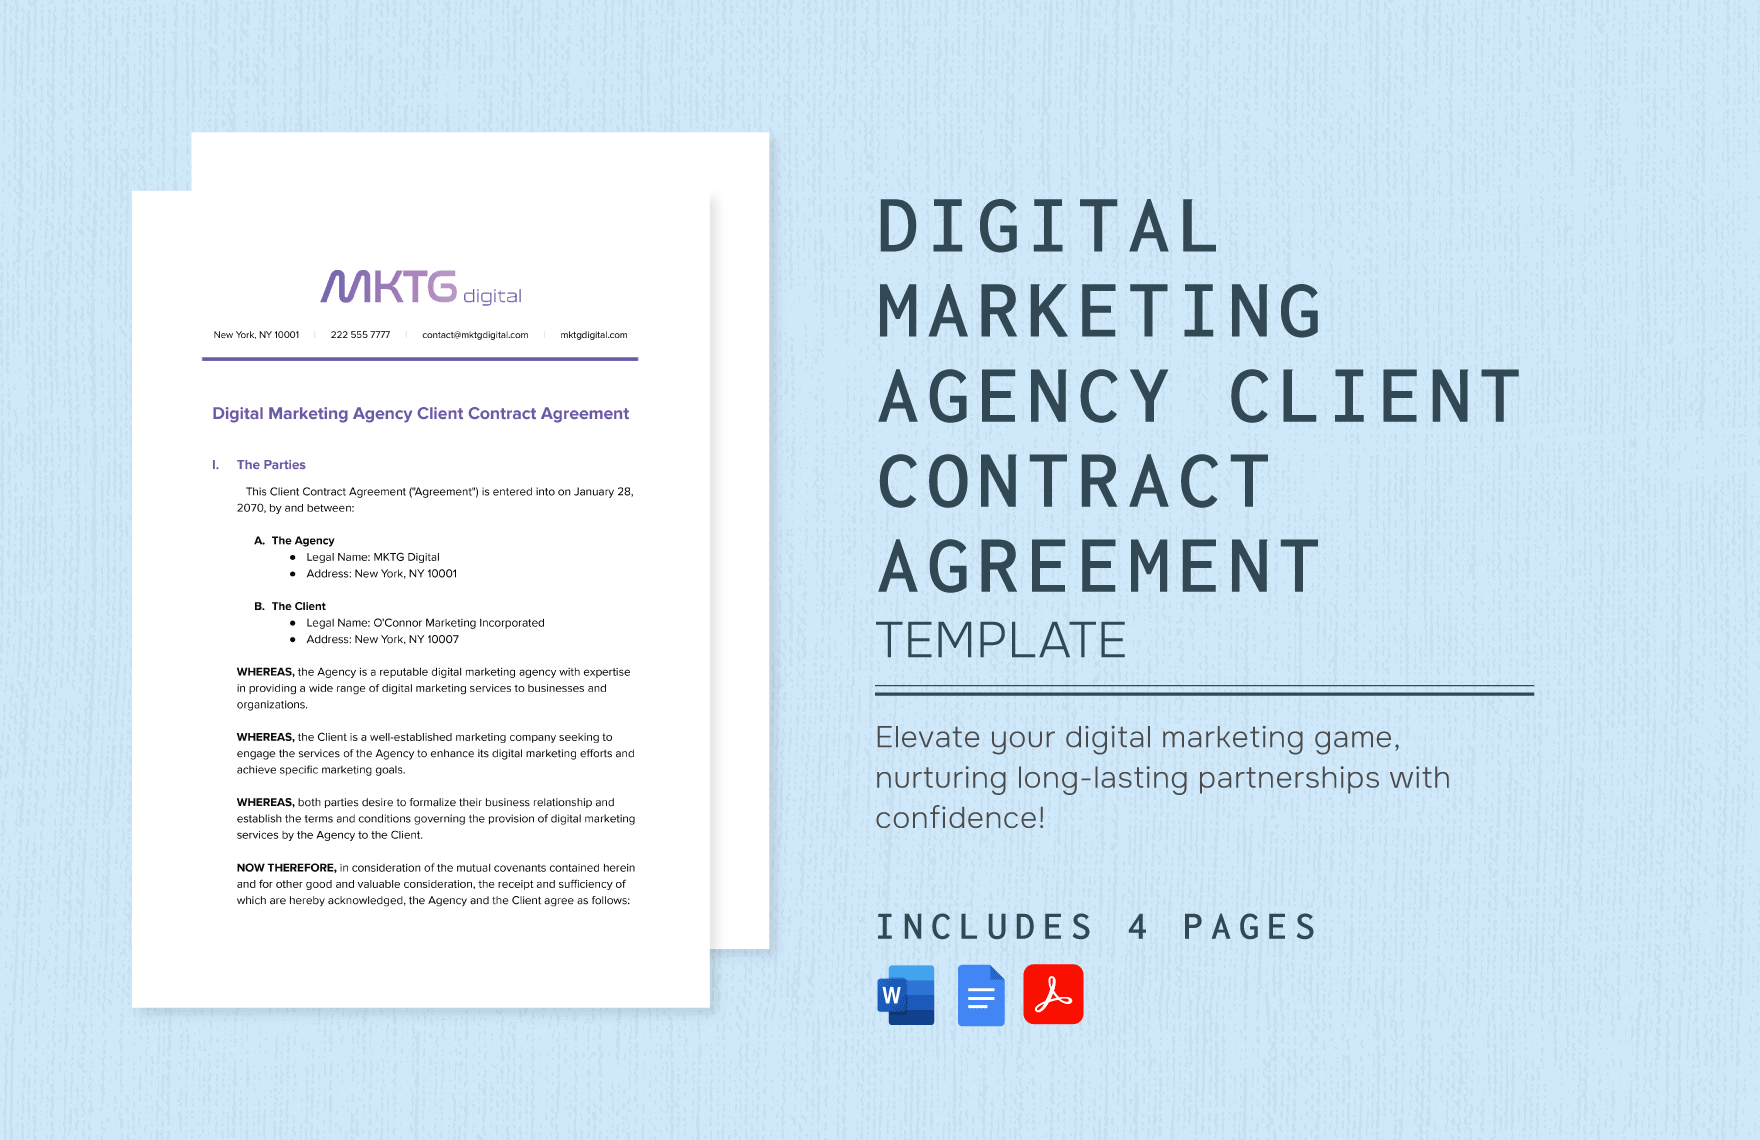 Digital Marketing Agency Client Contract Agreement Template in Word, Google Docs, PDF